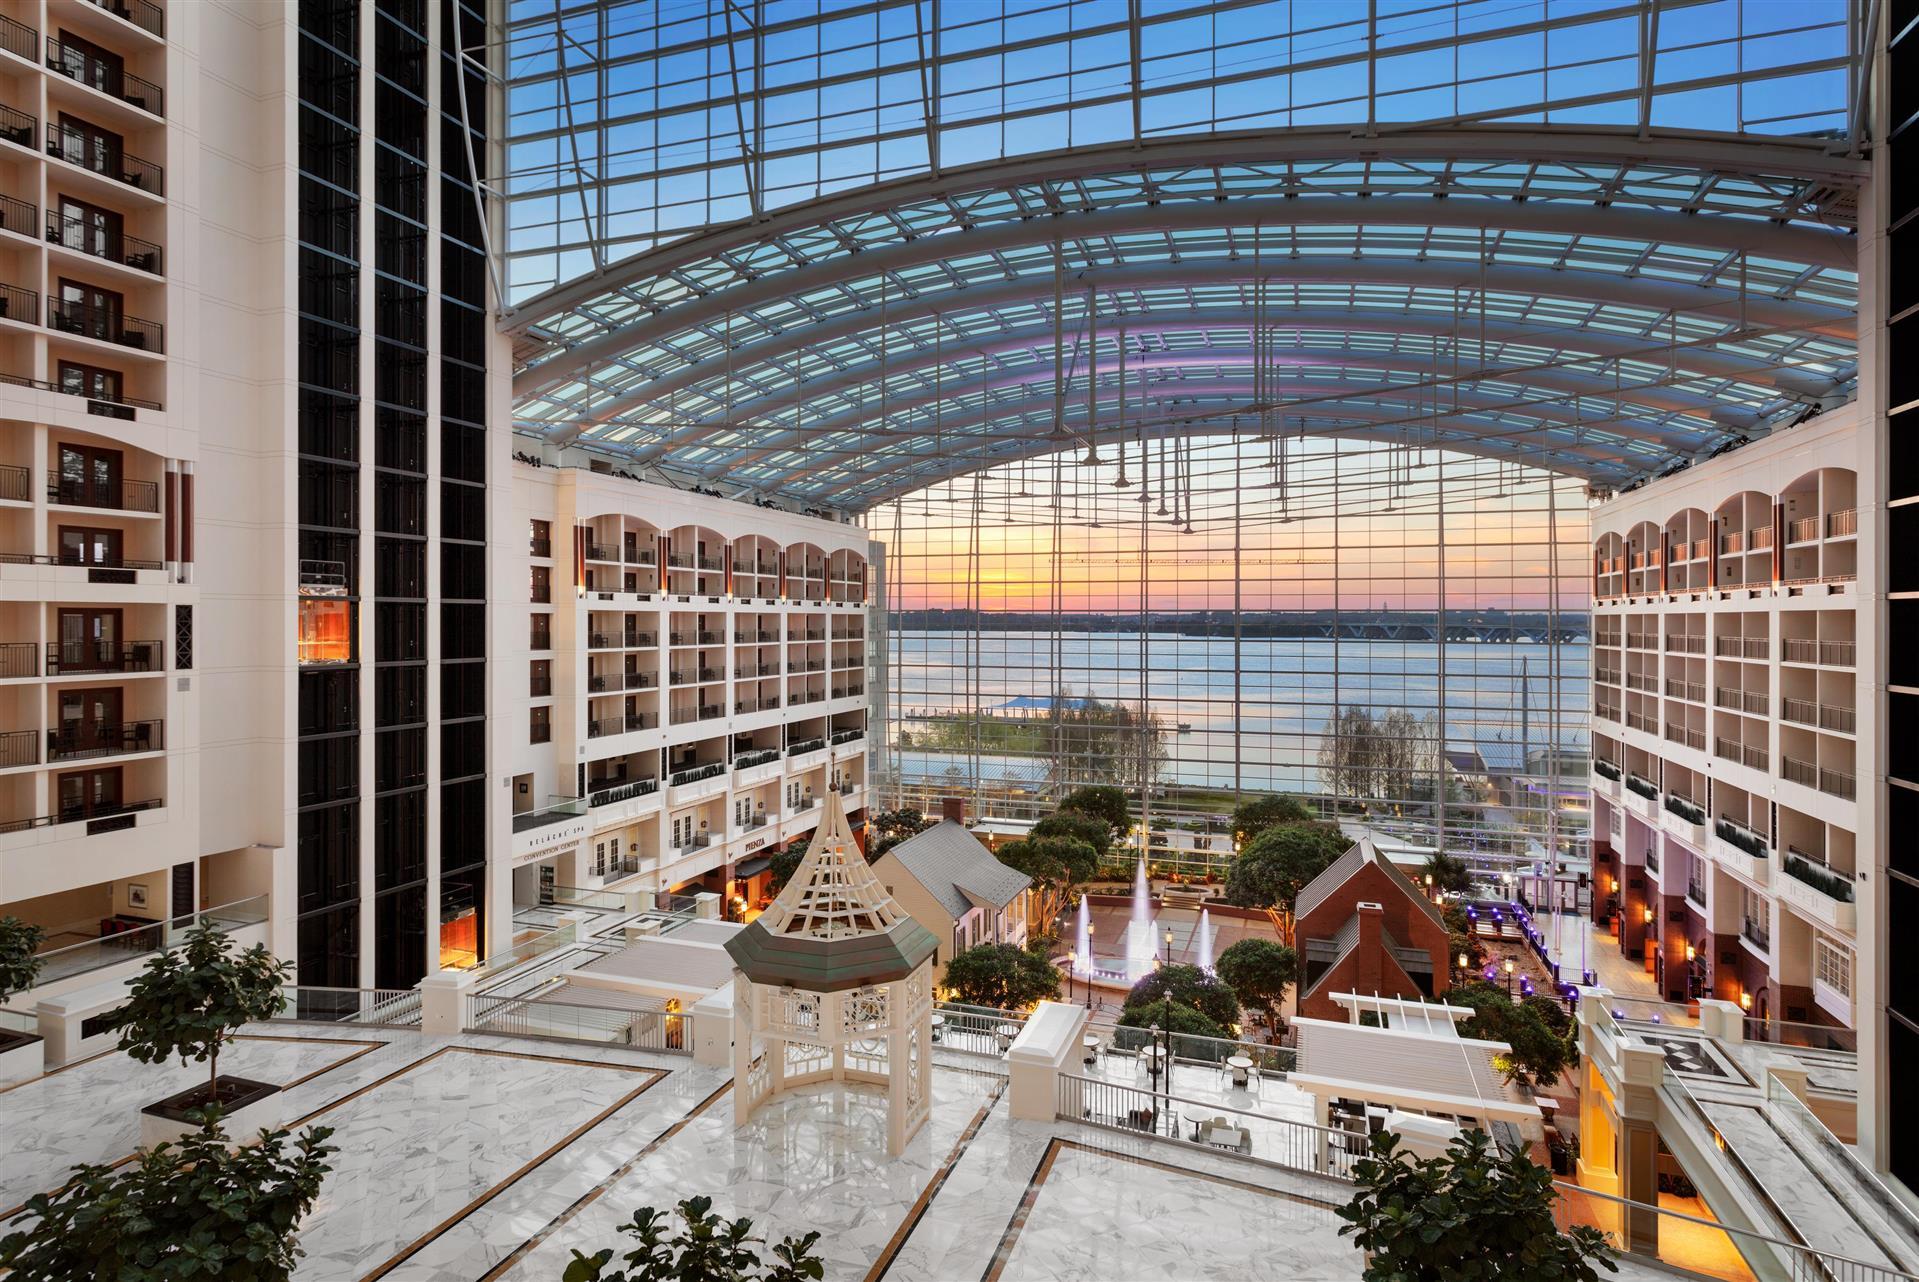 Gaylord National Resort & Convention Center in National Harbor, MD